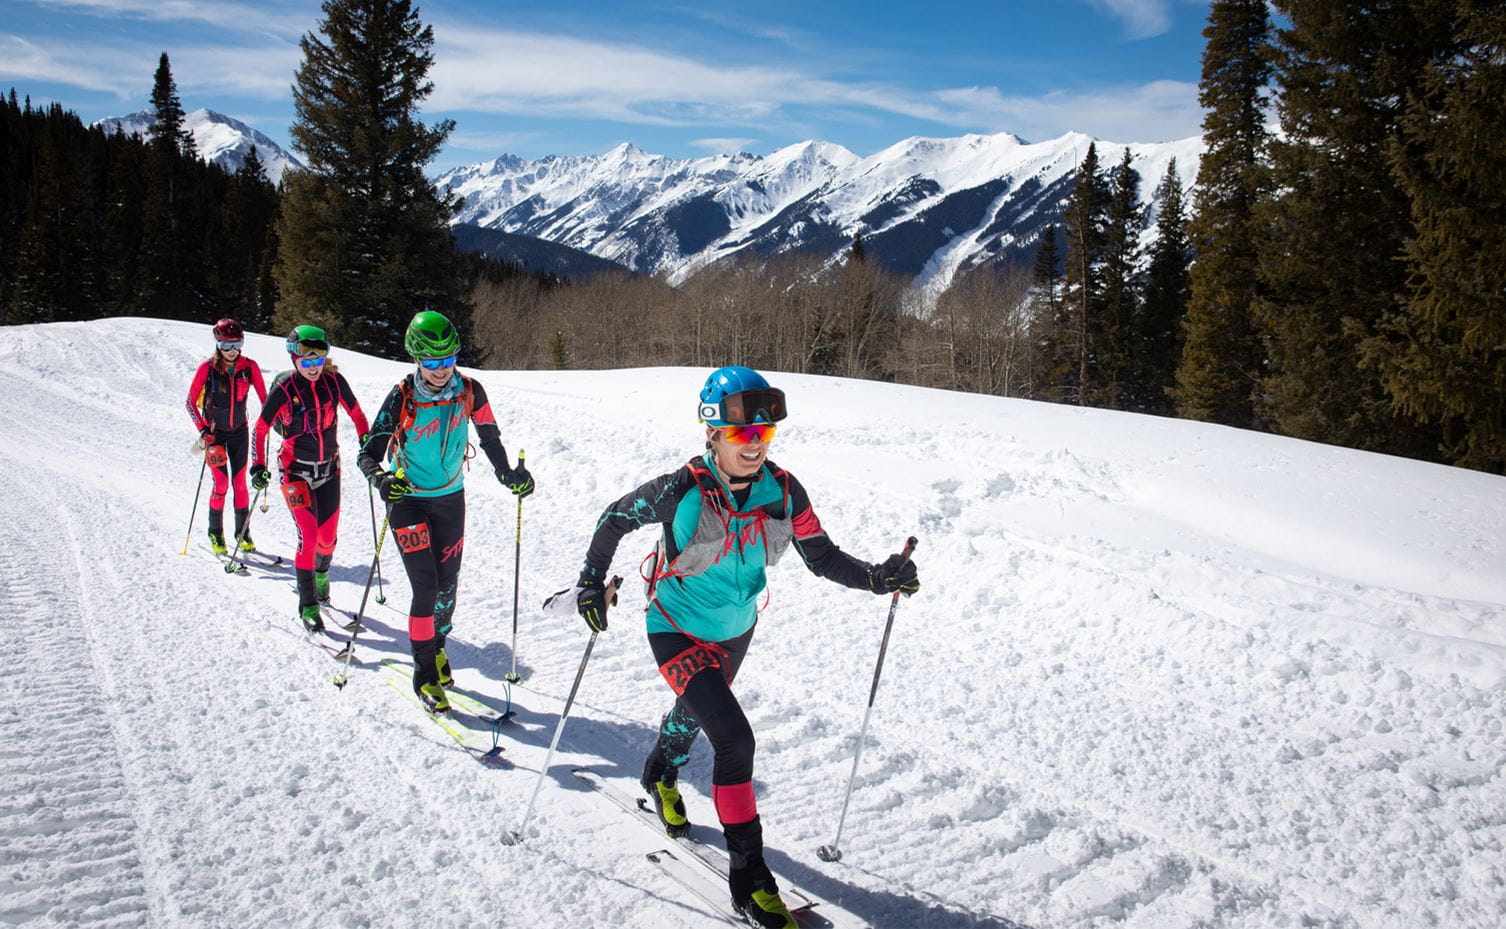 Ski mountaineers in a row during the Audi Power of Four Ski Mountaineering race at Aspen Snowmass